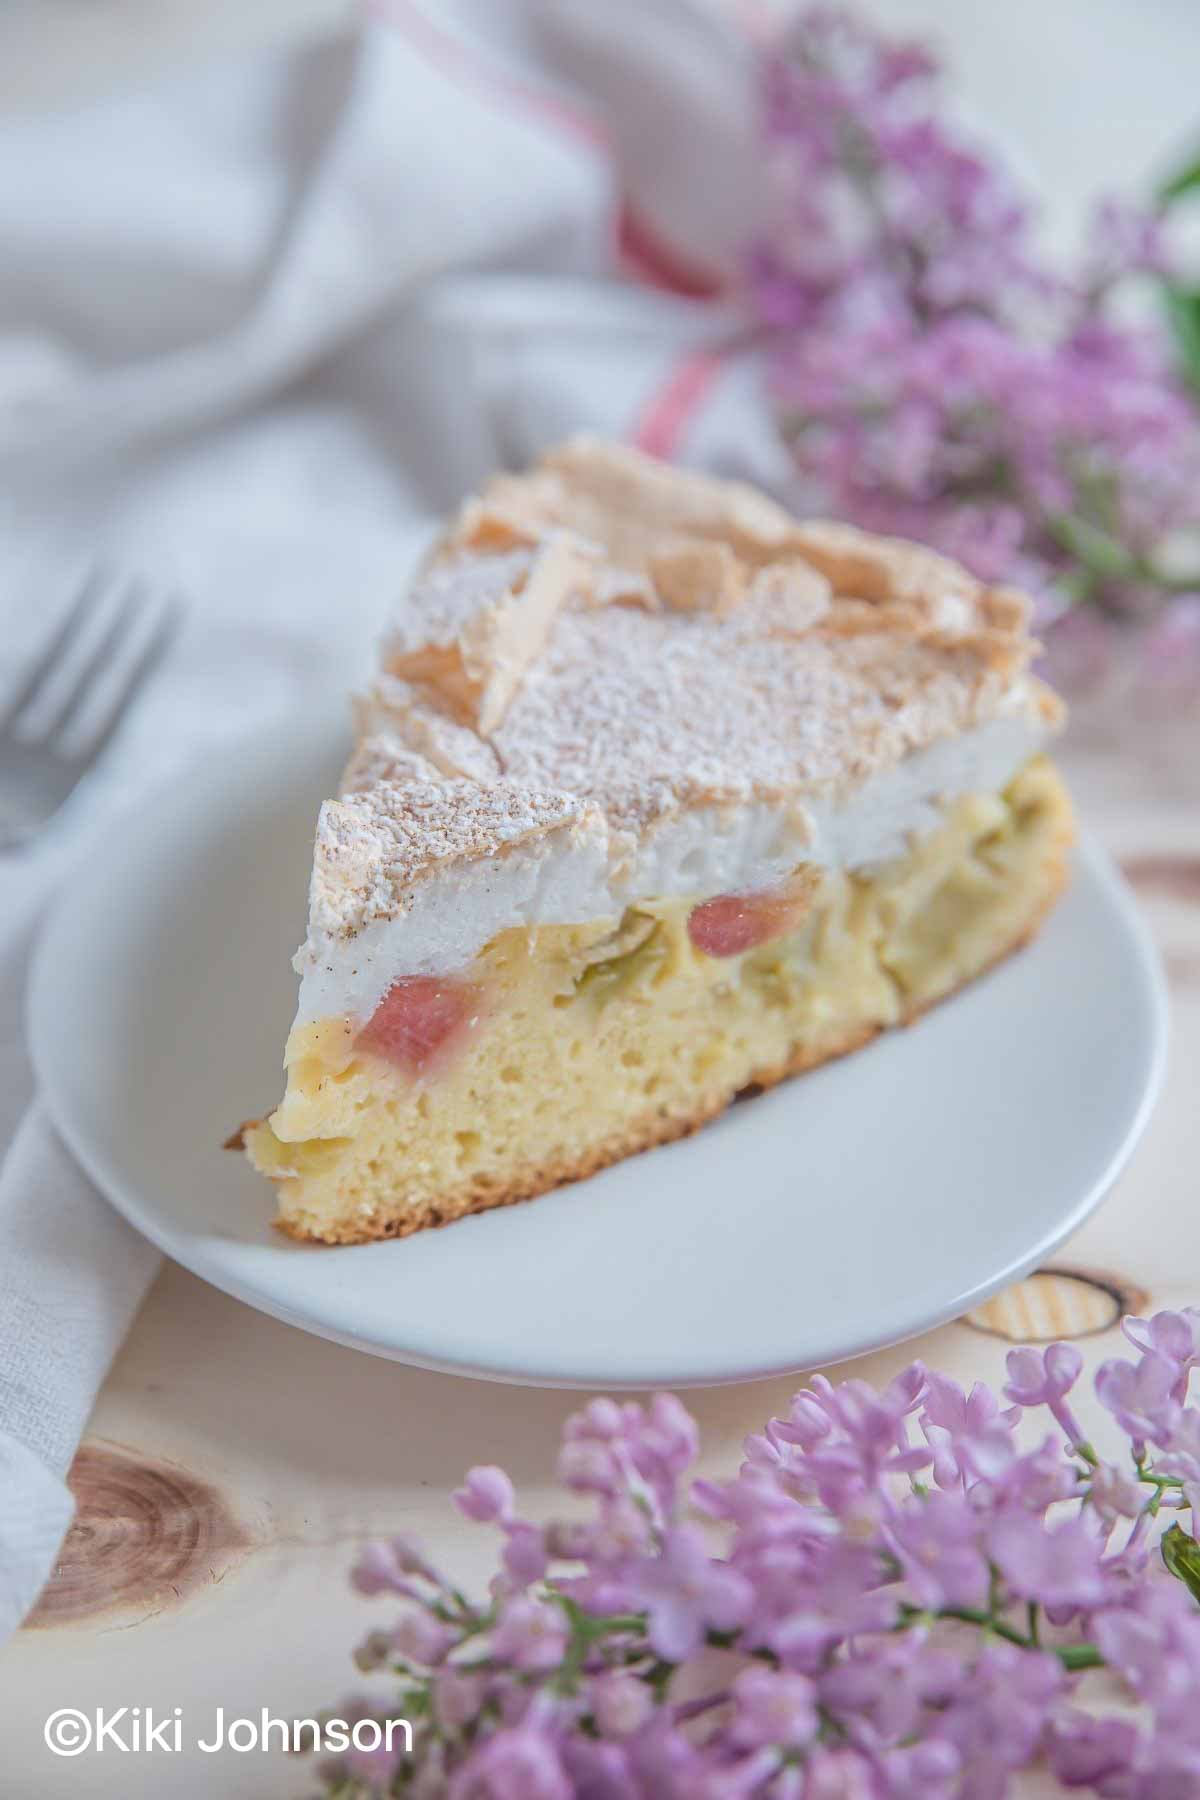 a slice of German Rhubarb Meringue Cake on a white cake plate with some lilac flowers in the background